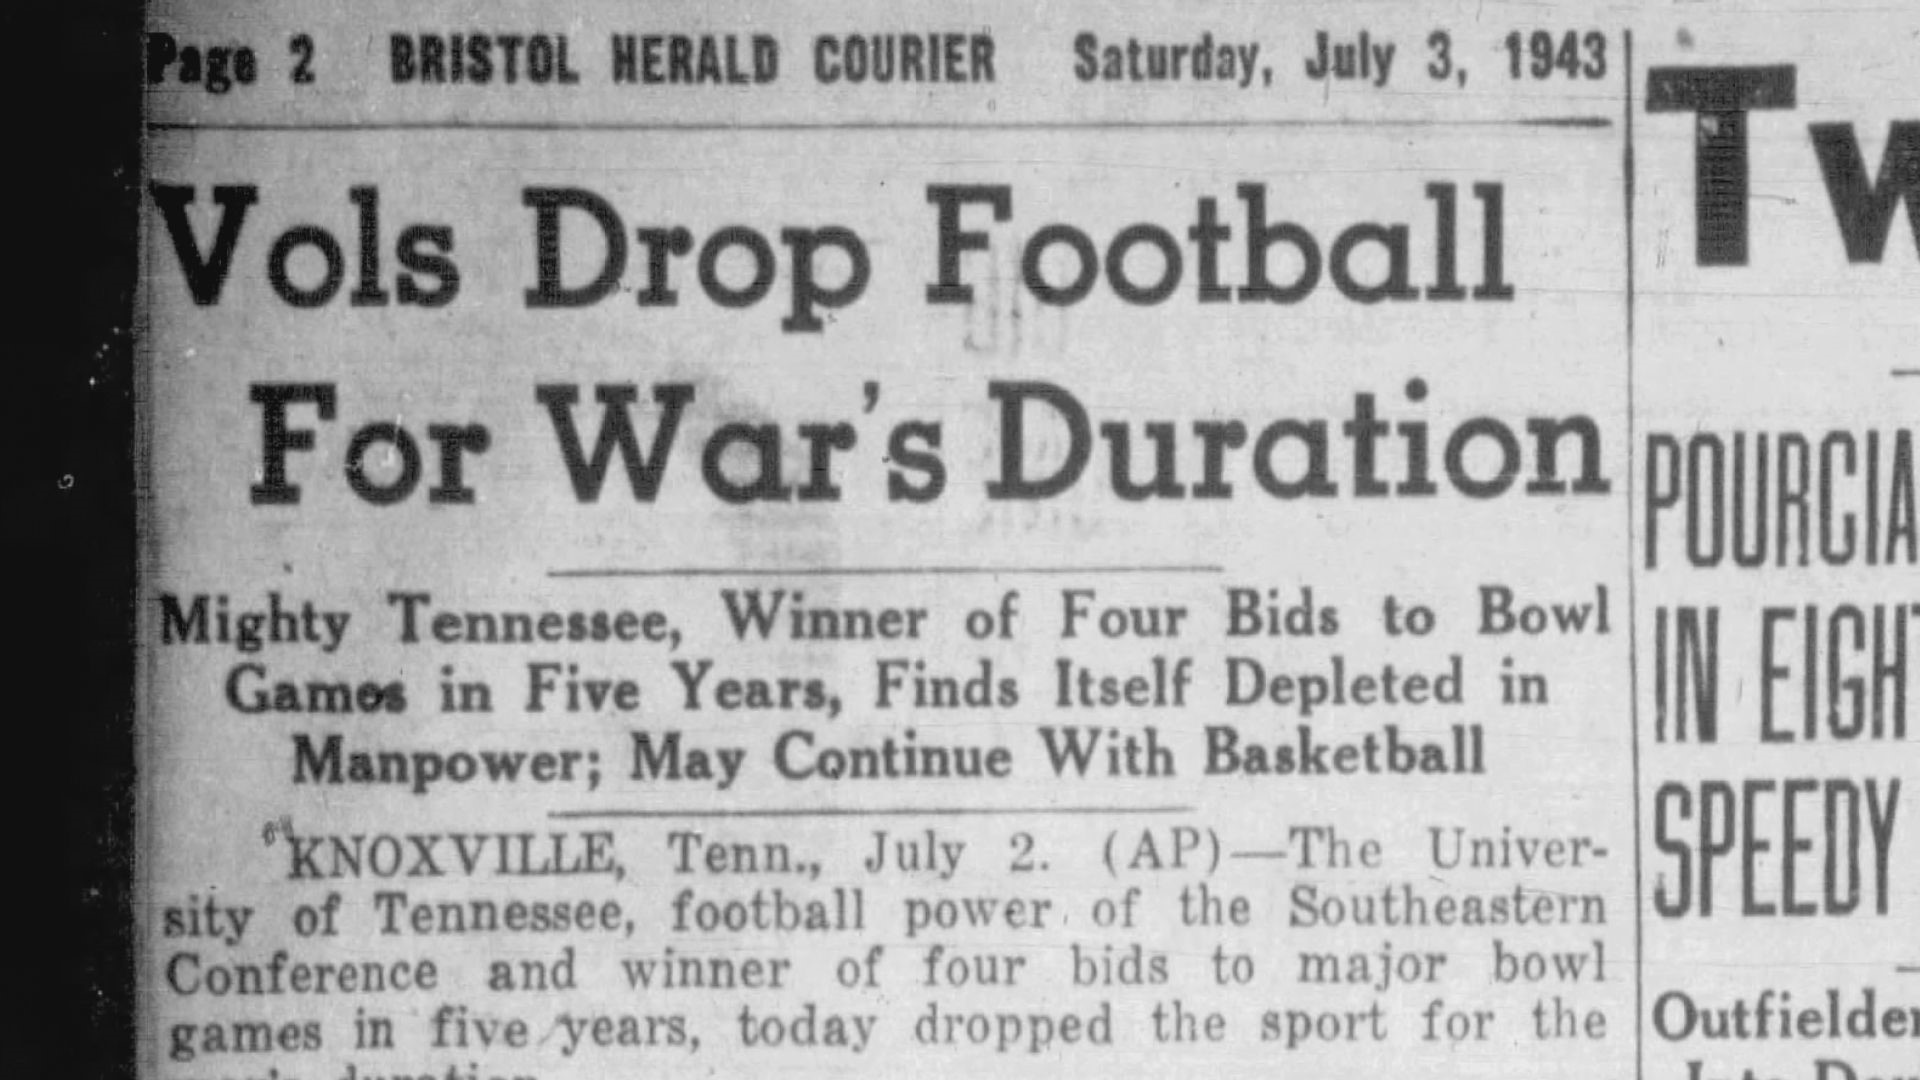 The last time the Vols canceled a football season was 1943, despite several last-ditch attempts by the SEC to field a schedule.